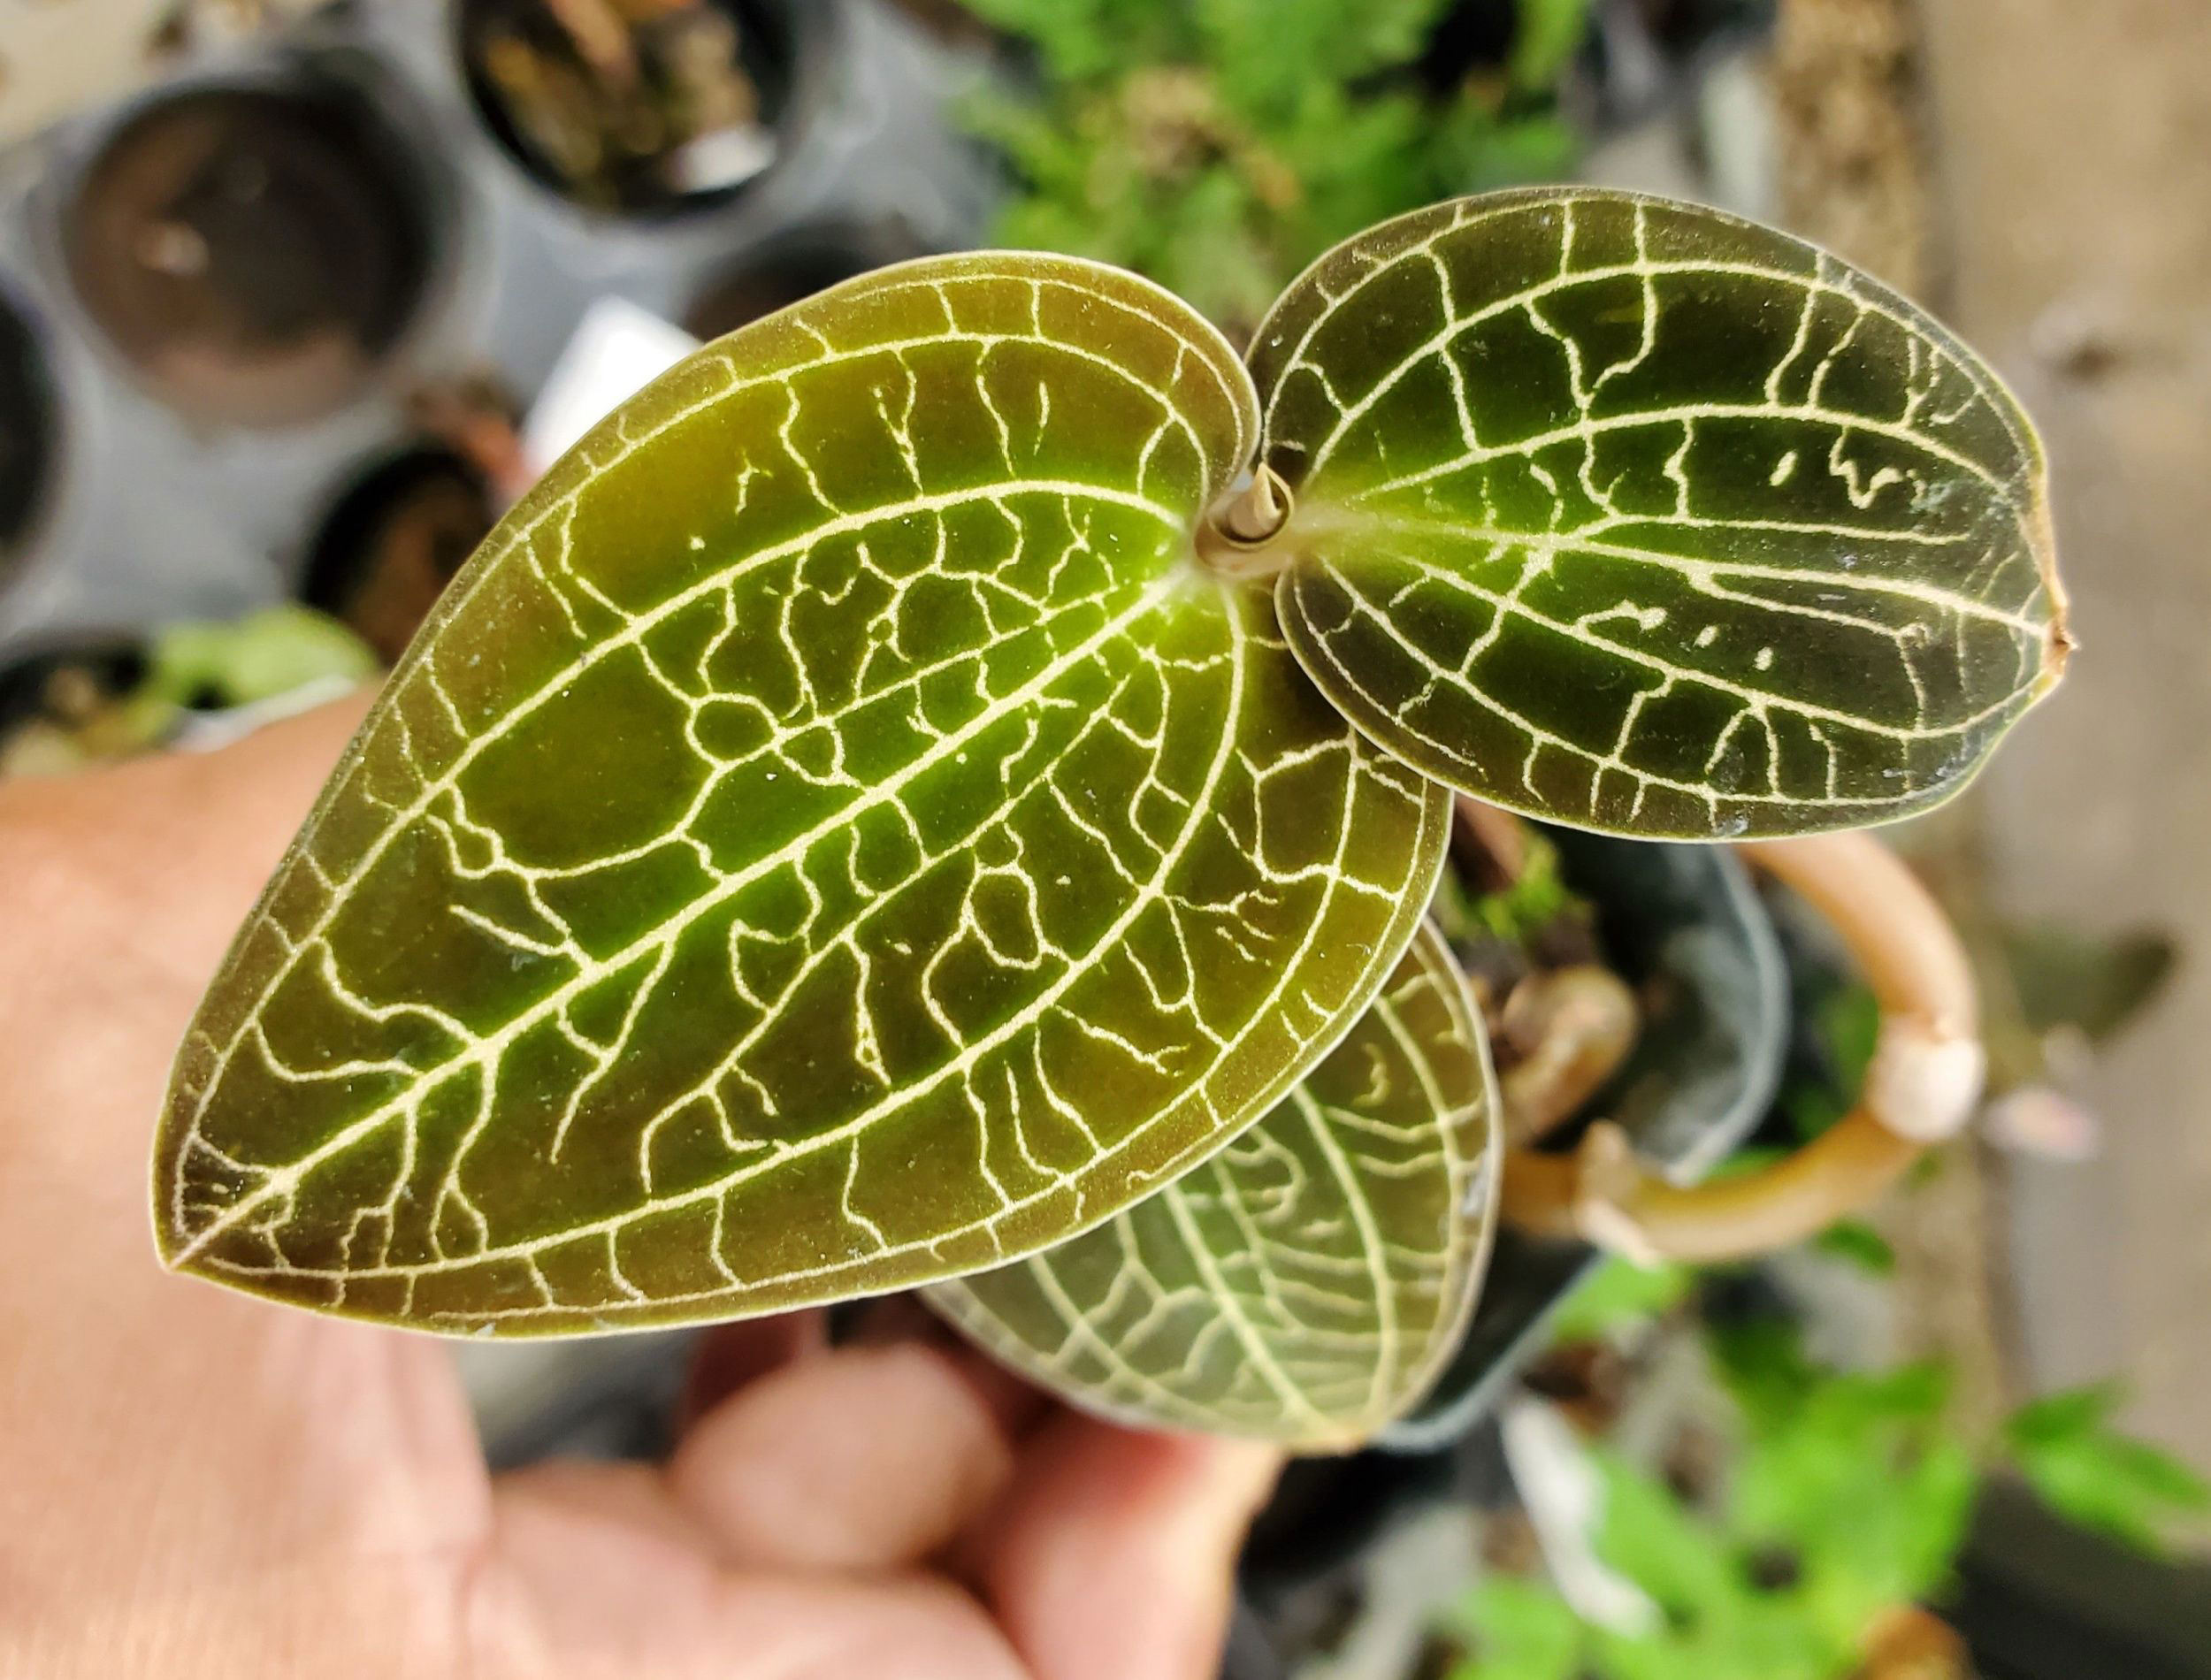 5 Top Care Tips For Your Jewel Orchid